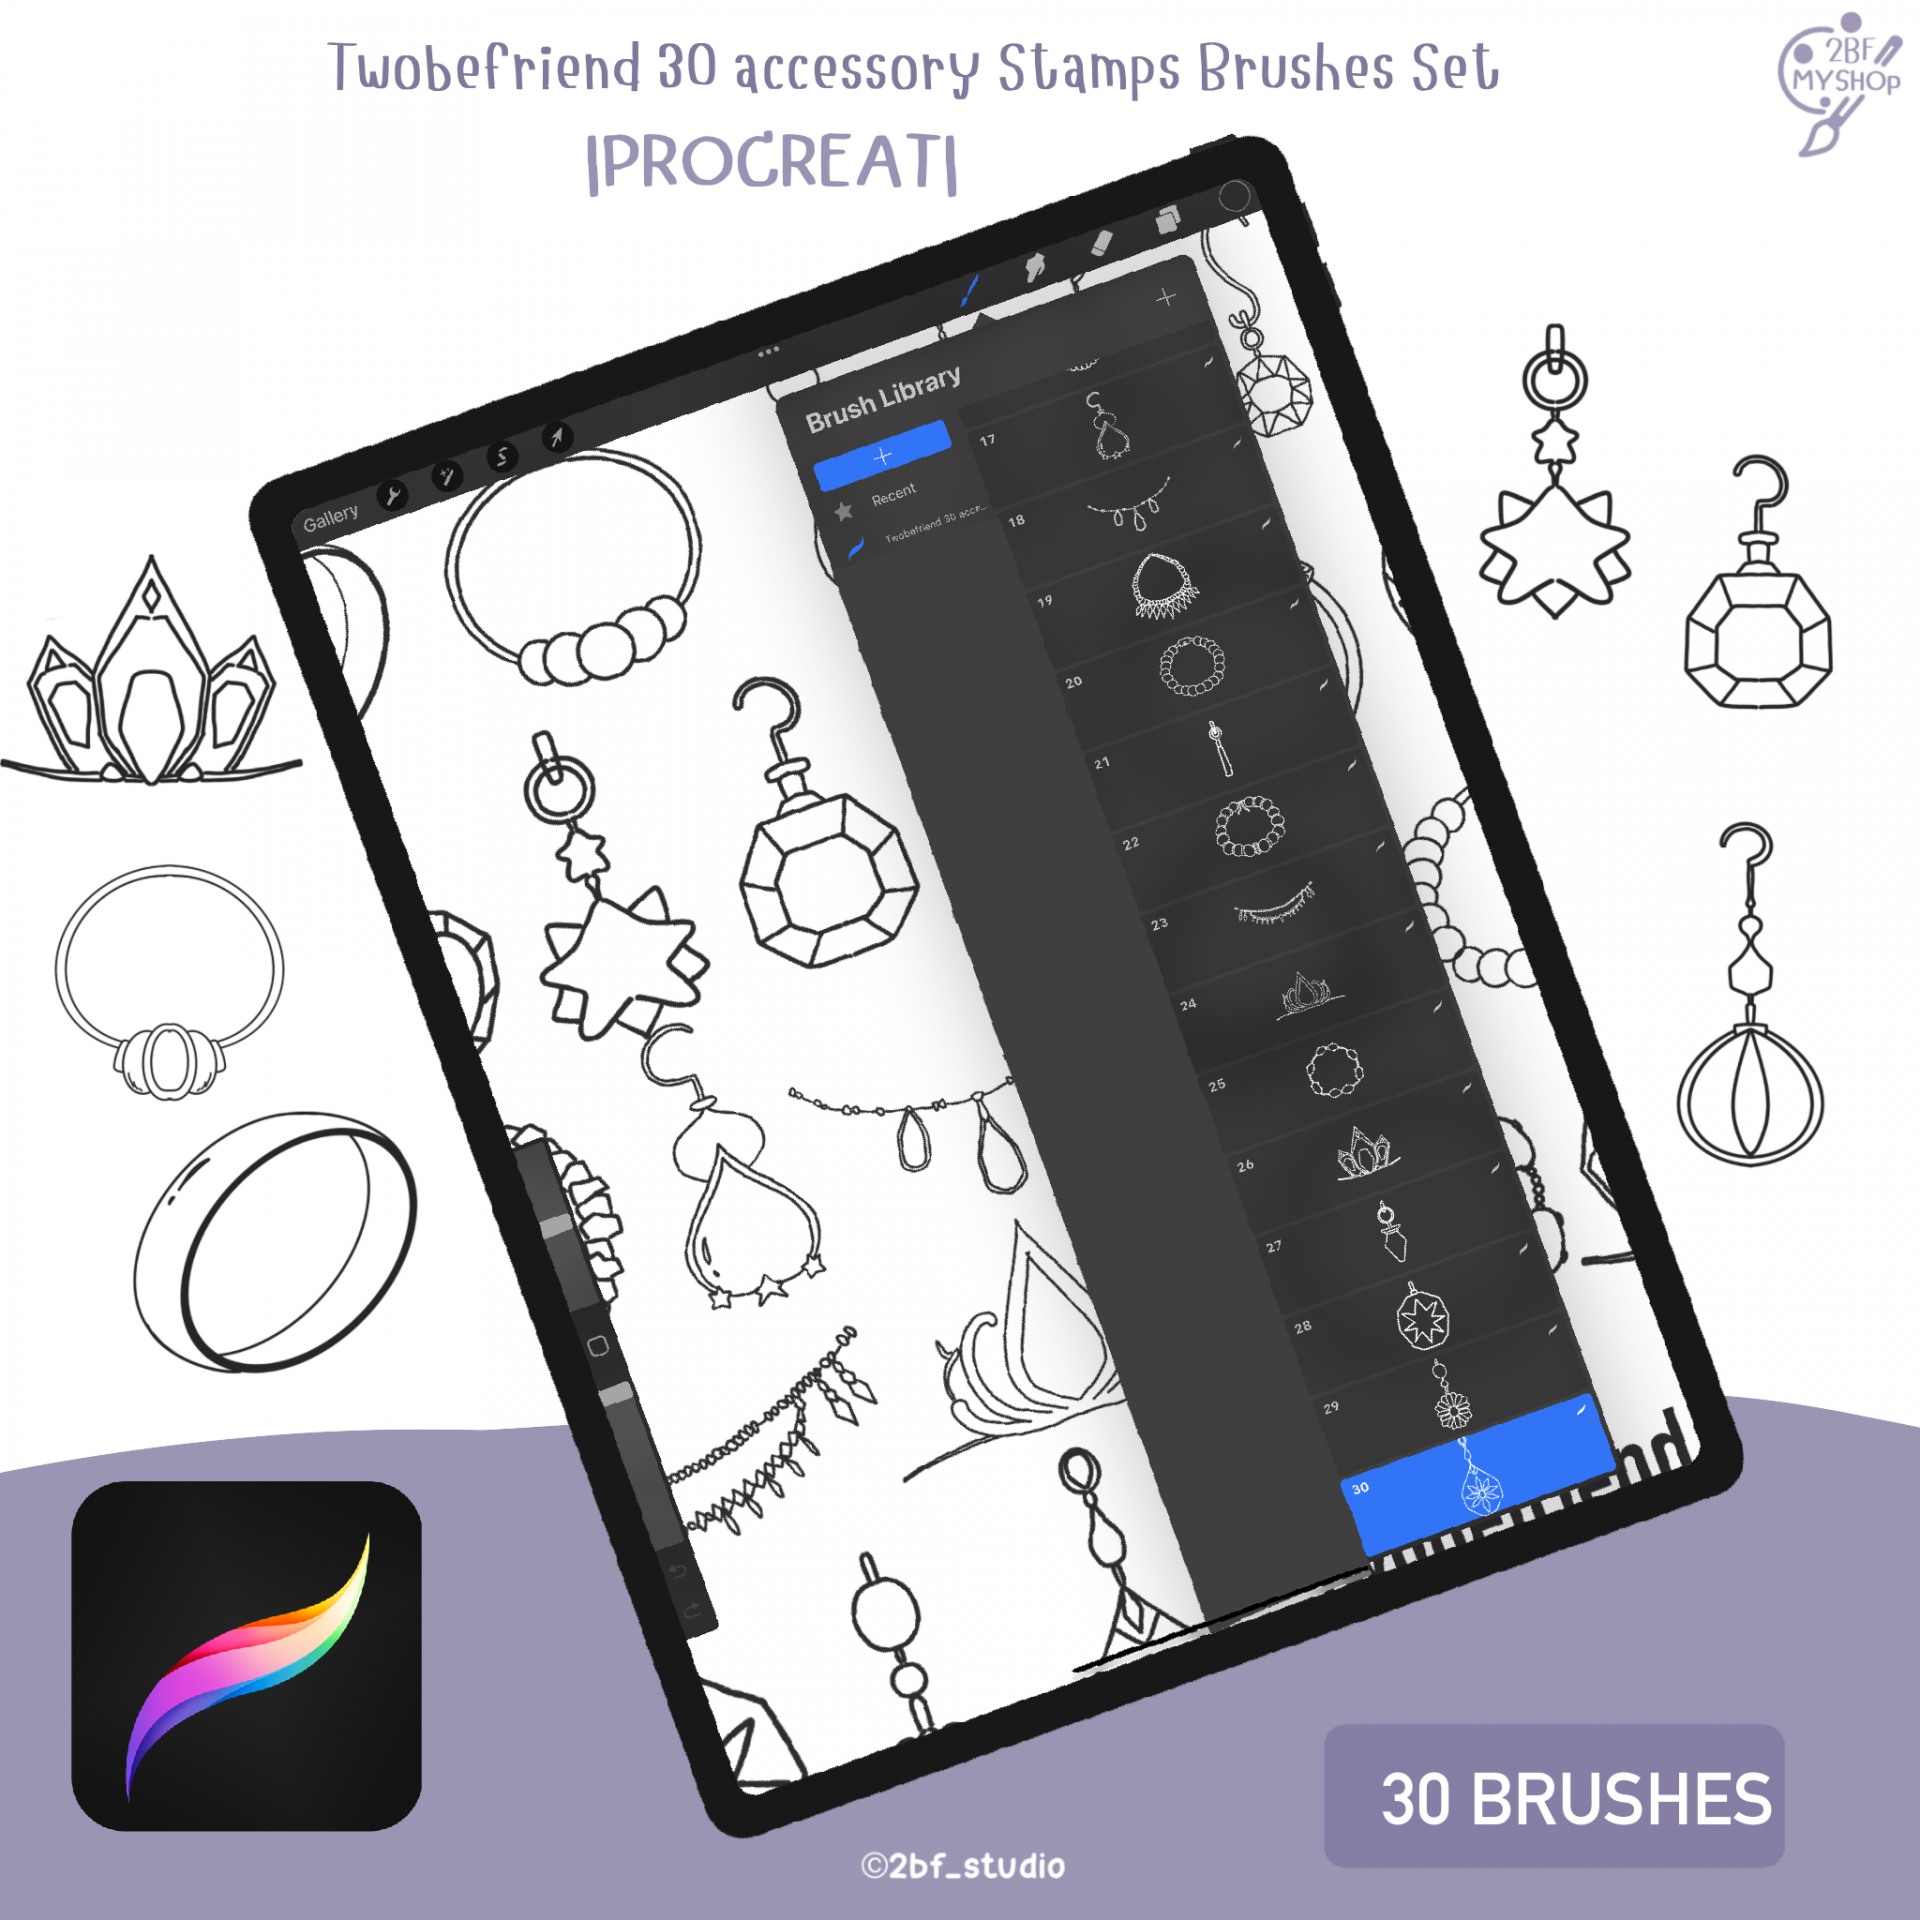 Twobefriend 30 accessory Stamps Brushes Set   |PROCREAT BRUSHED|